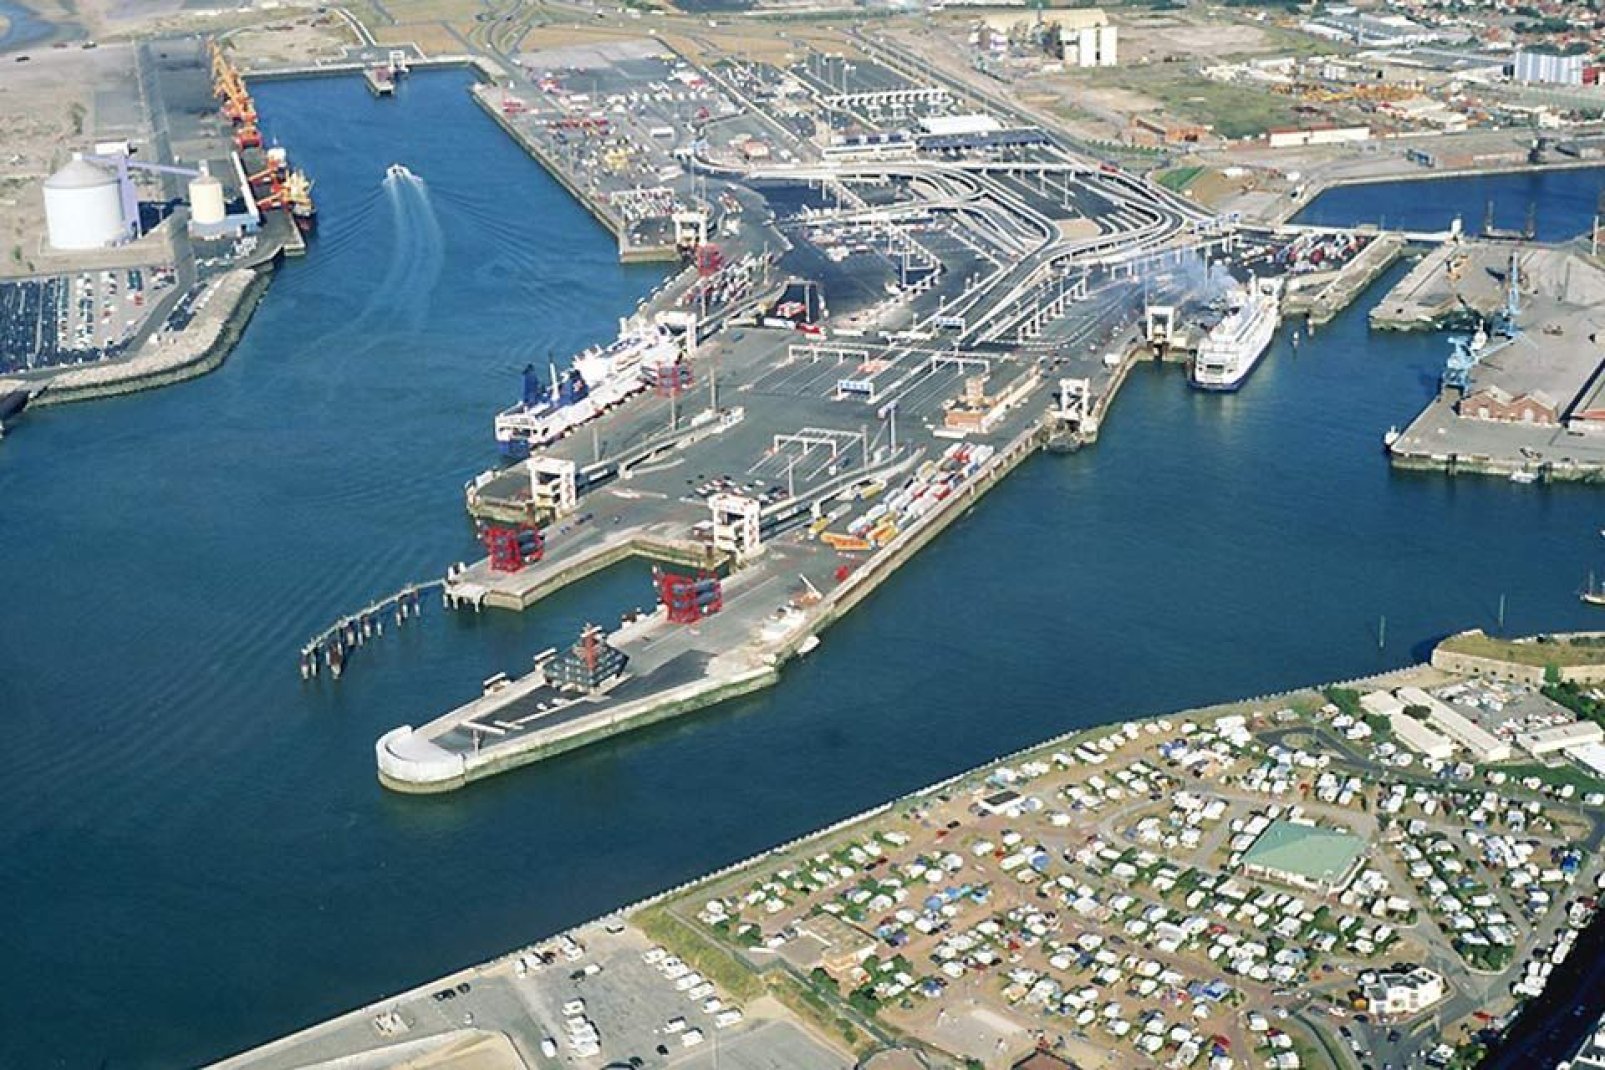 The port of Calais is the departure point for many passengers and merchandise headed to England. Indeed, it is the largest passenger port in France.